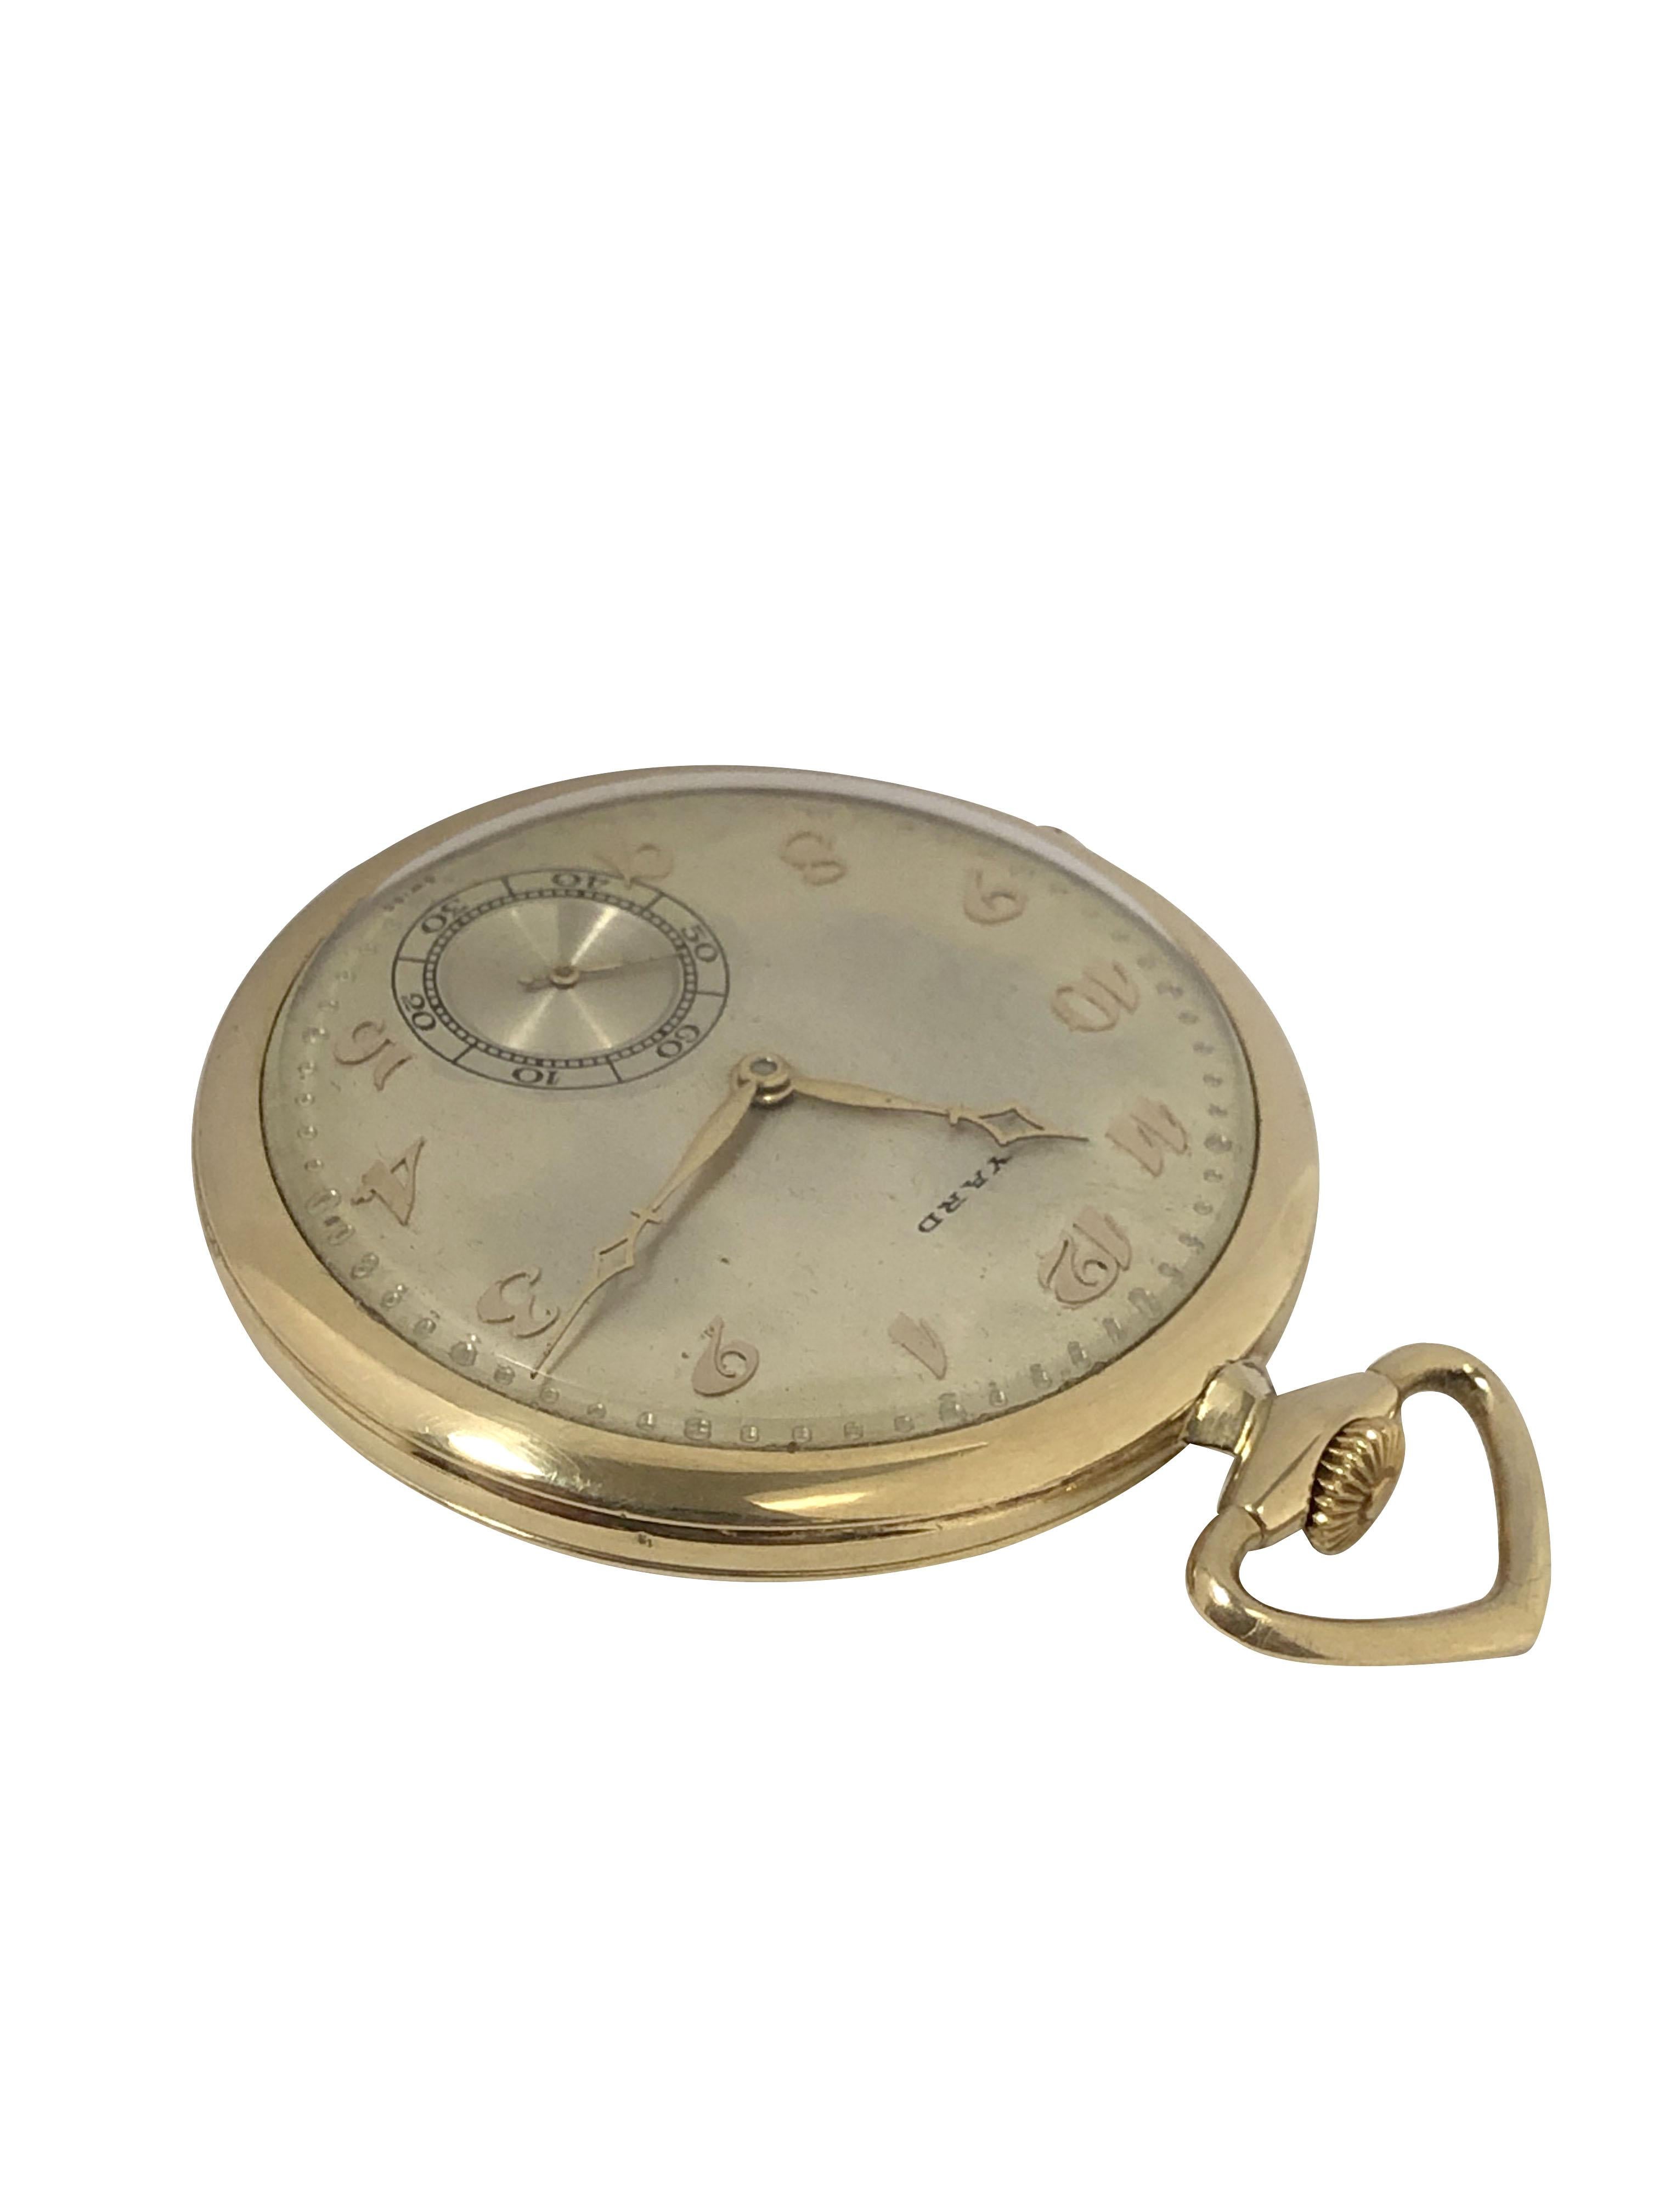 Circa 1930 International Watch Company IWC Schaffhausen Pocket Watch Retailed by Raymond Yard, 44 M.M. Diameter and 8 M.M. thick 14K Yellow Gold case by Cress Arrow. 17 Jewel Mechanical, Manual wind Nickle lever movement. Original Excellent